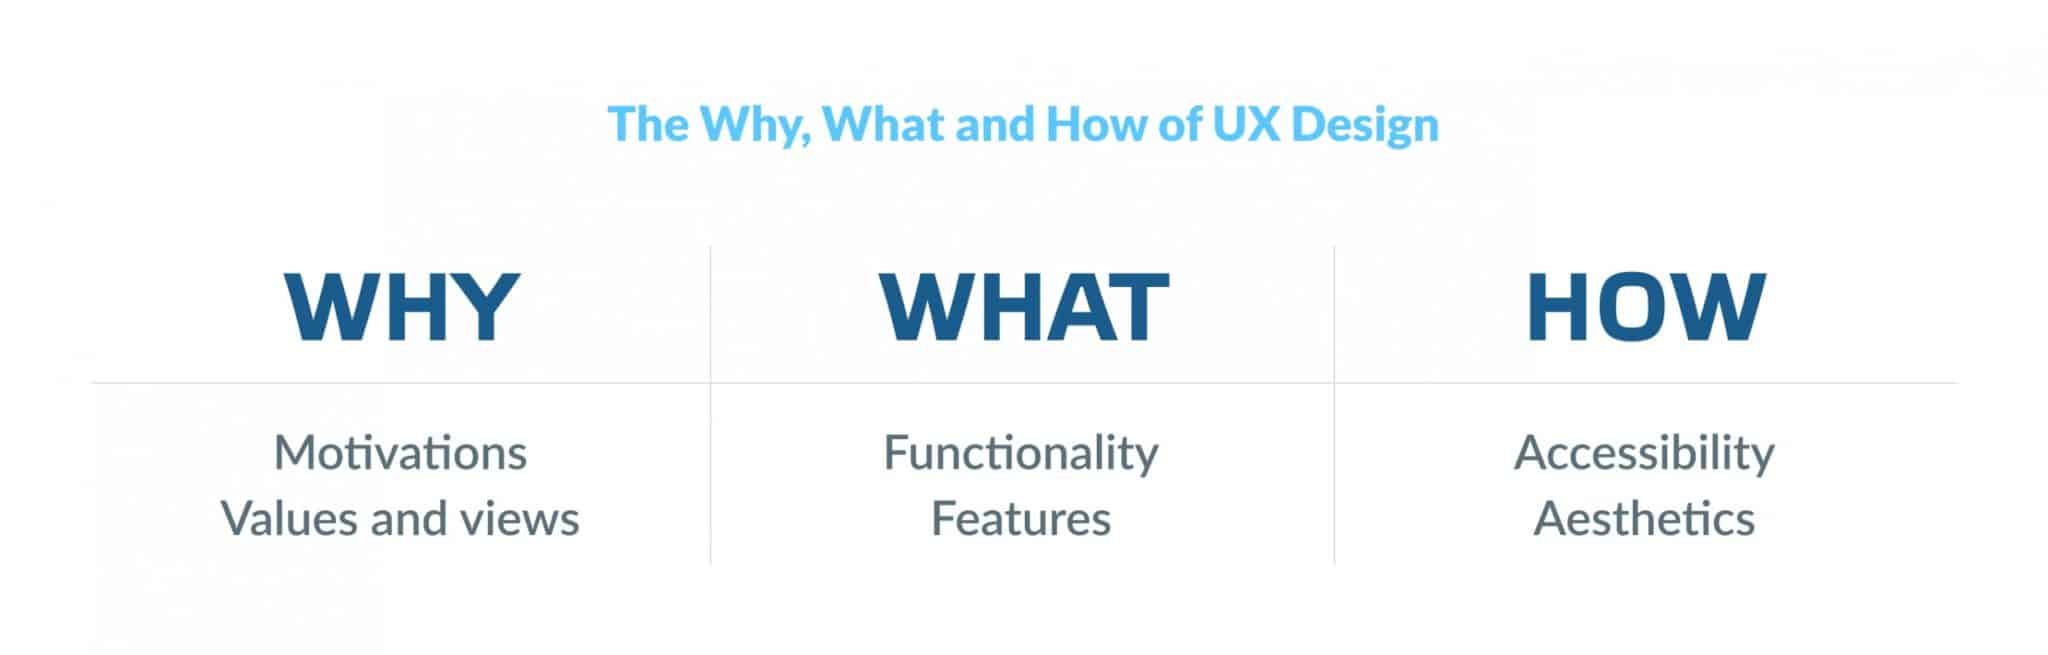 Why is UX design important?